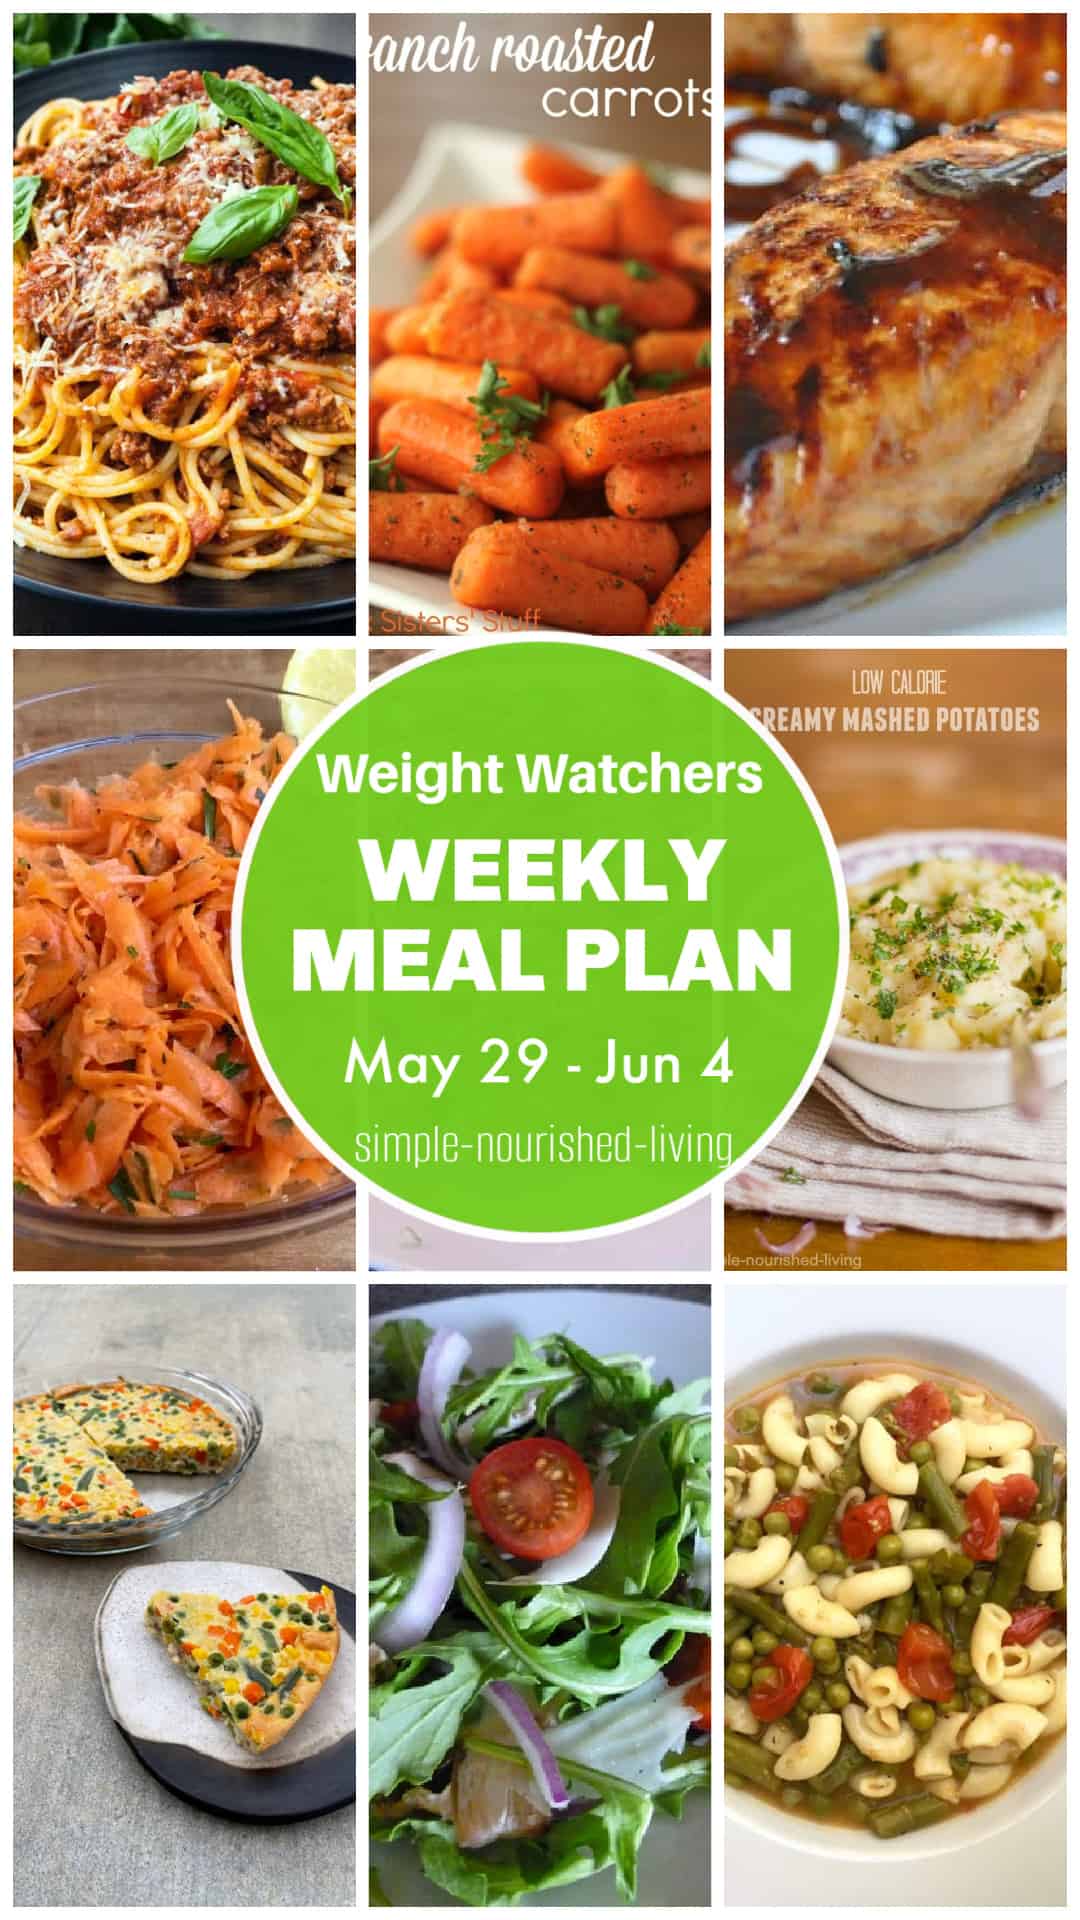 Weight Watchers Weekly Meal Plan Food Photo Collage.  Slow Cooker Turkey Bolognese Sauce over Pasta, Roasted Baby Carrots, Glazed Salmon Fillet, Shredded Carrot Salad, Mashed Potatoes, Incredible Broccoli Chicken Pie, Arugula Salad, Asparagus Mine.